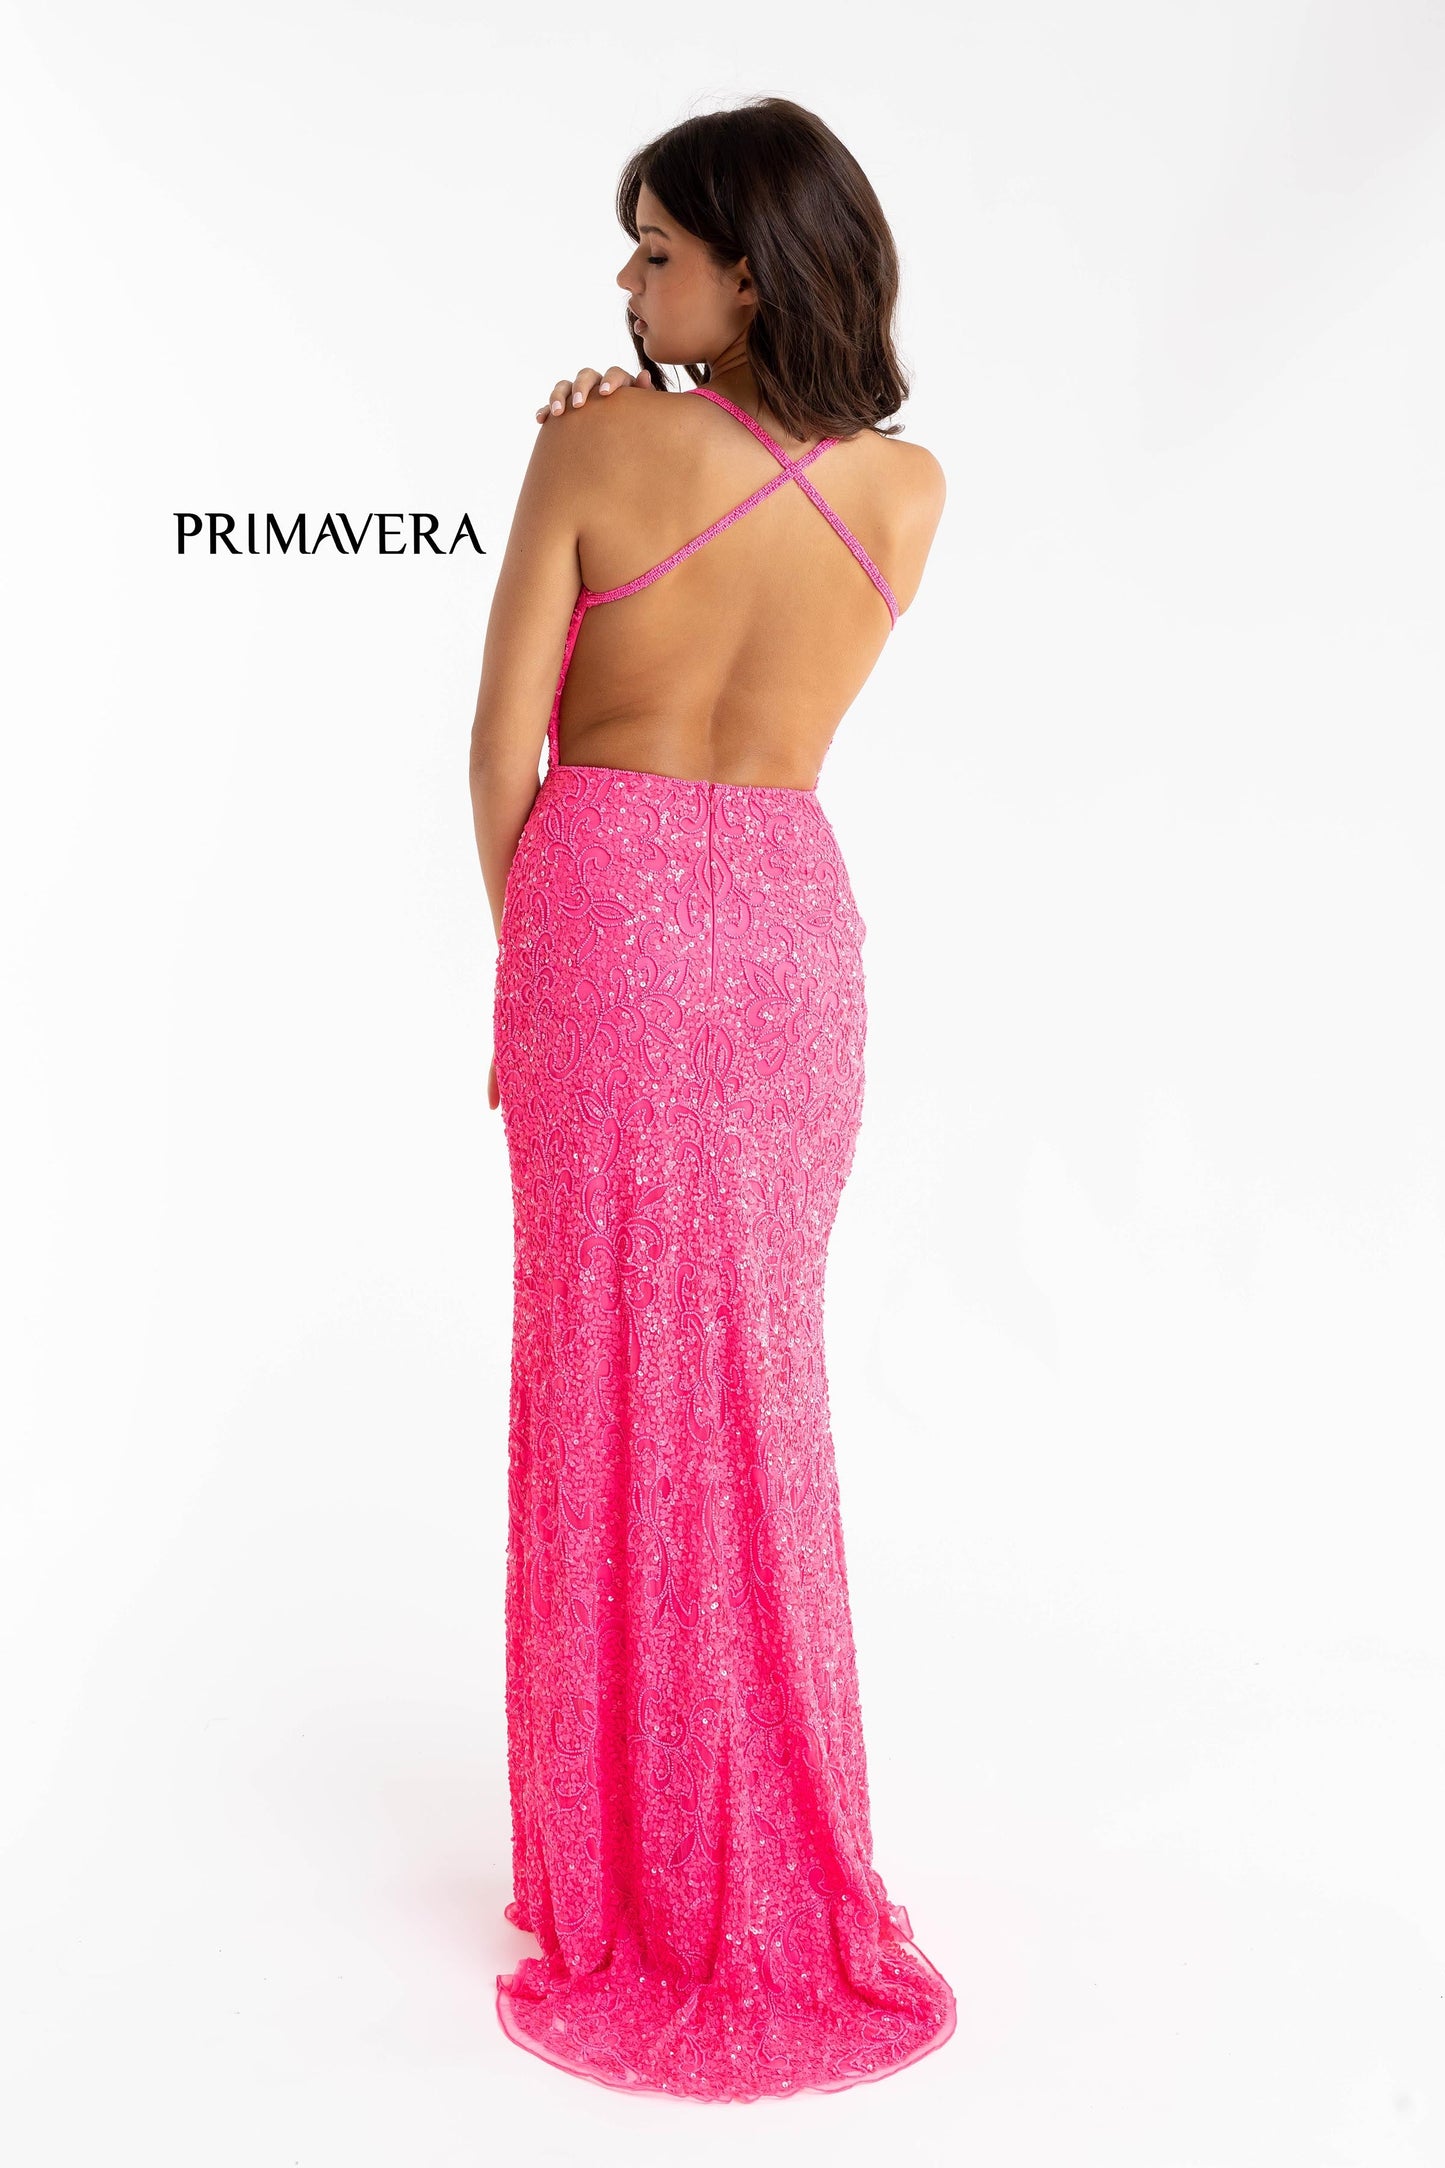 Primavera Couture 3295 Exclusive  Prom Dress, Formal Evening Gown.  This exclusive prom dress is designed with sequins throughout.  I has a V neckline with beaded spaghetti straps that crisscross in the open back.  It is long with a left side slit.  Available Colors:  NEON PINK  Available Sizes:  000